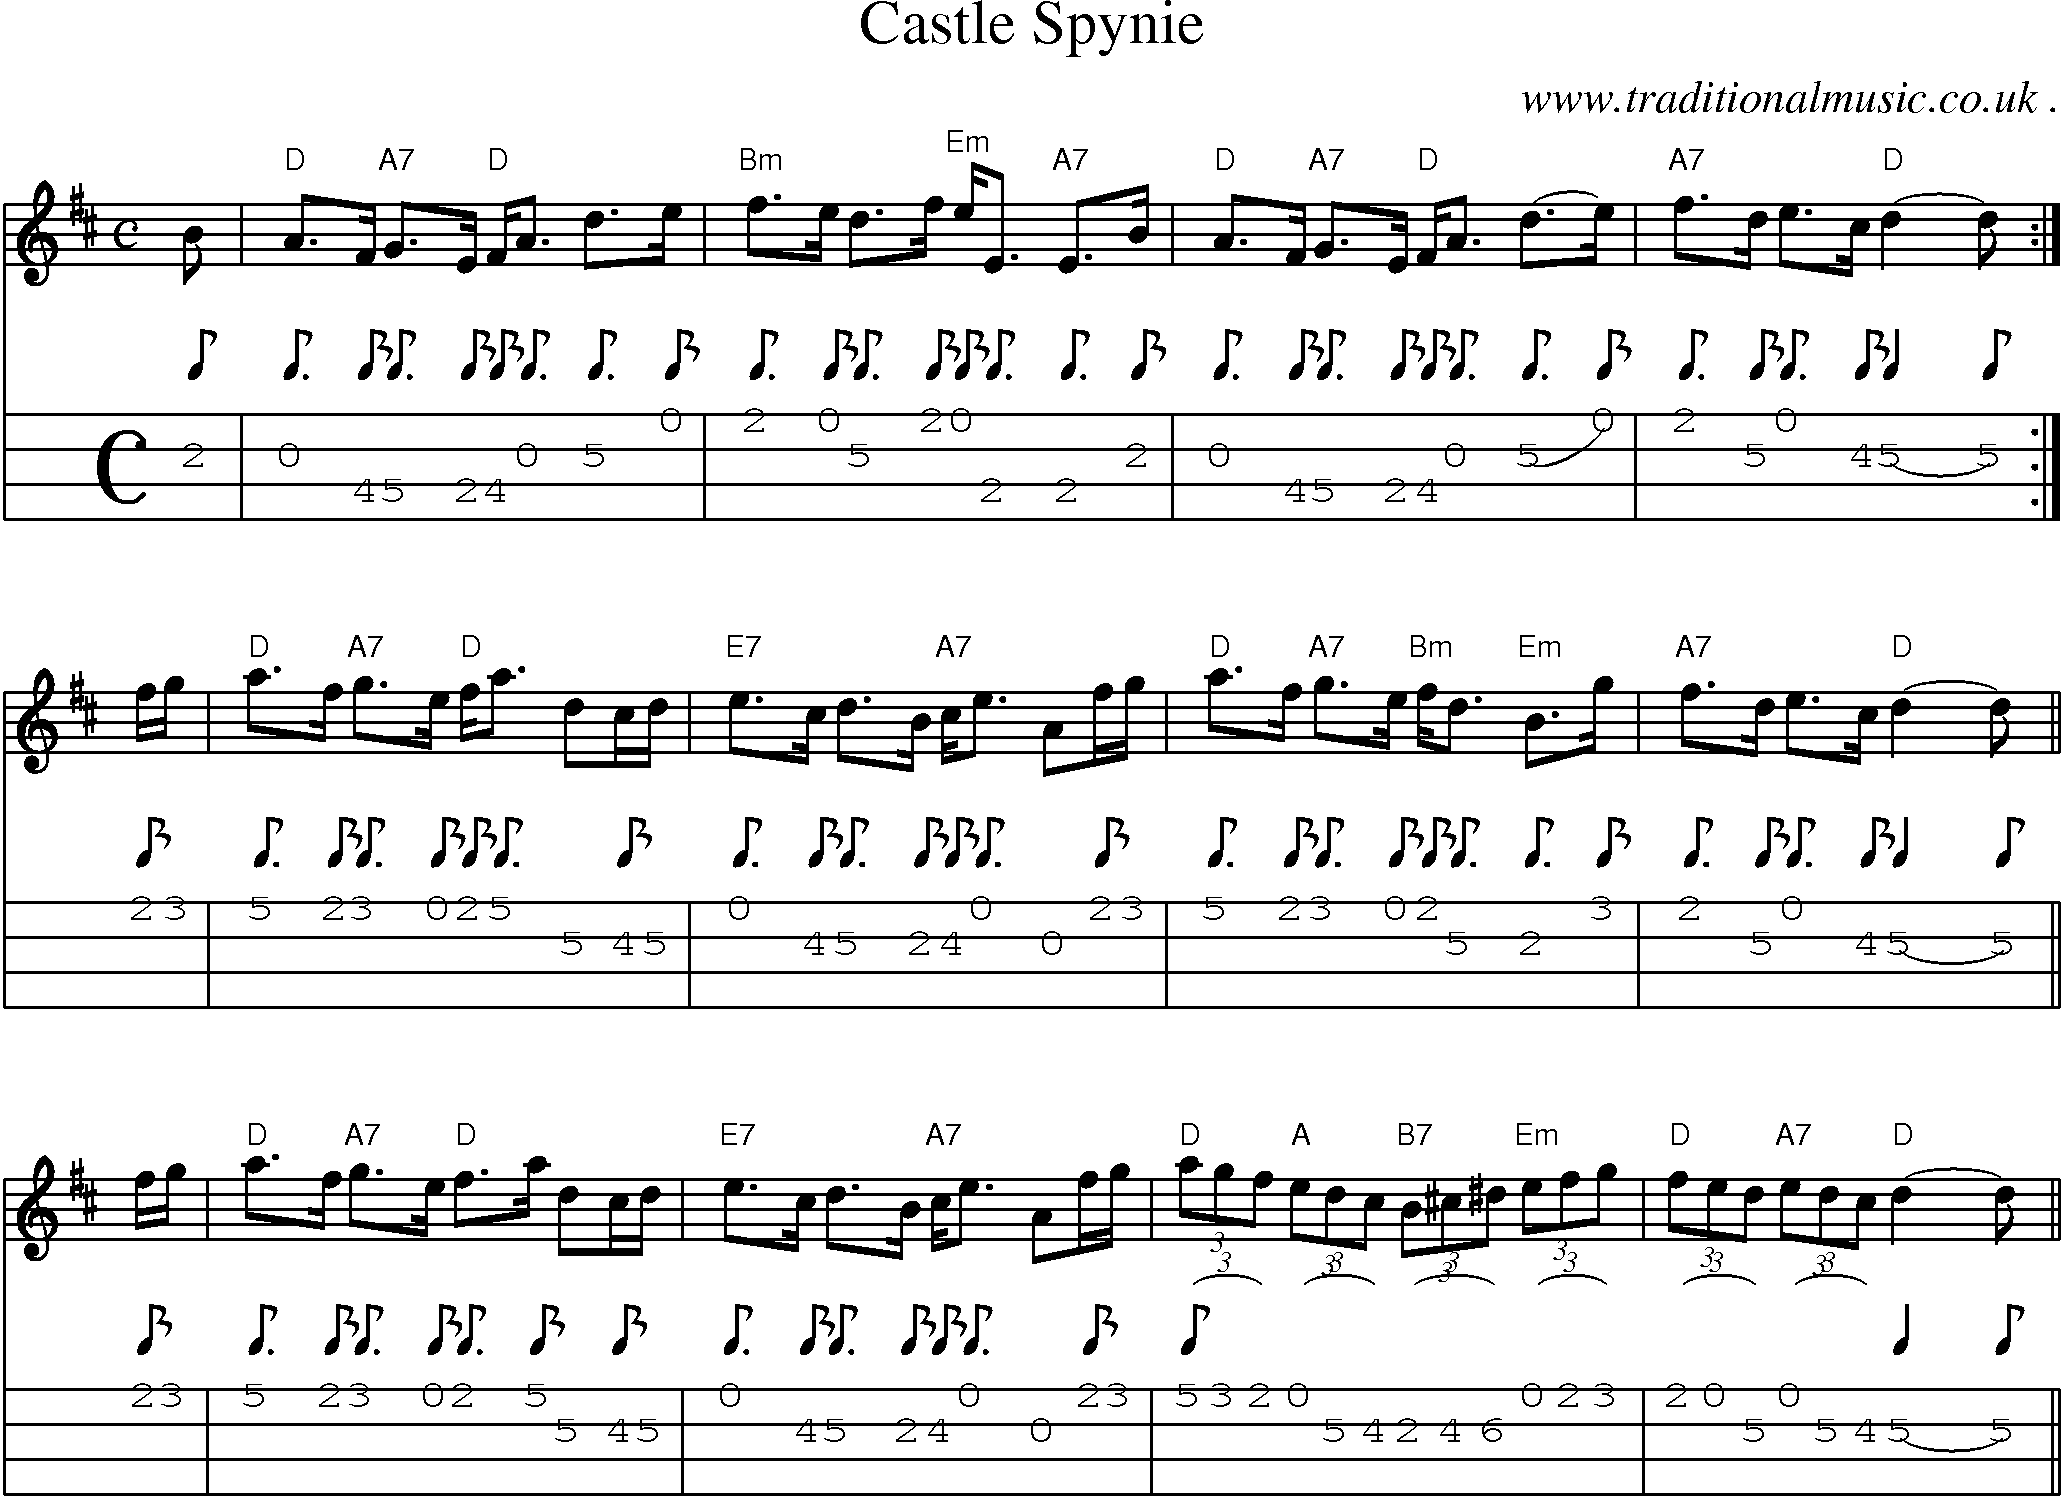 Sheet-music  score, Chords and Mandolin Tabs for Castle Spynie